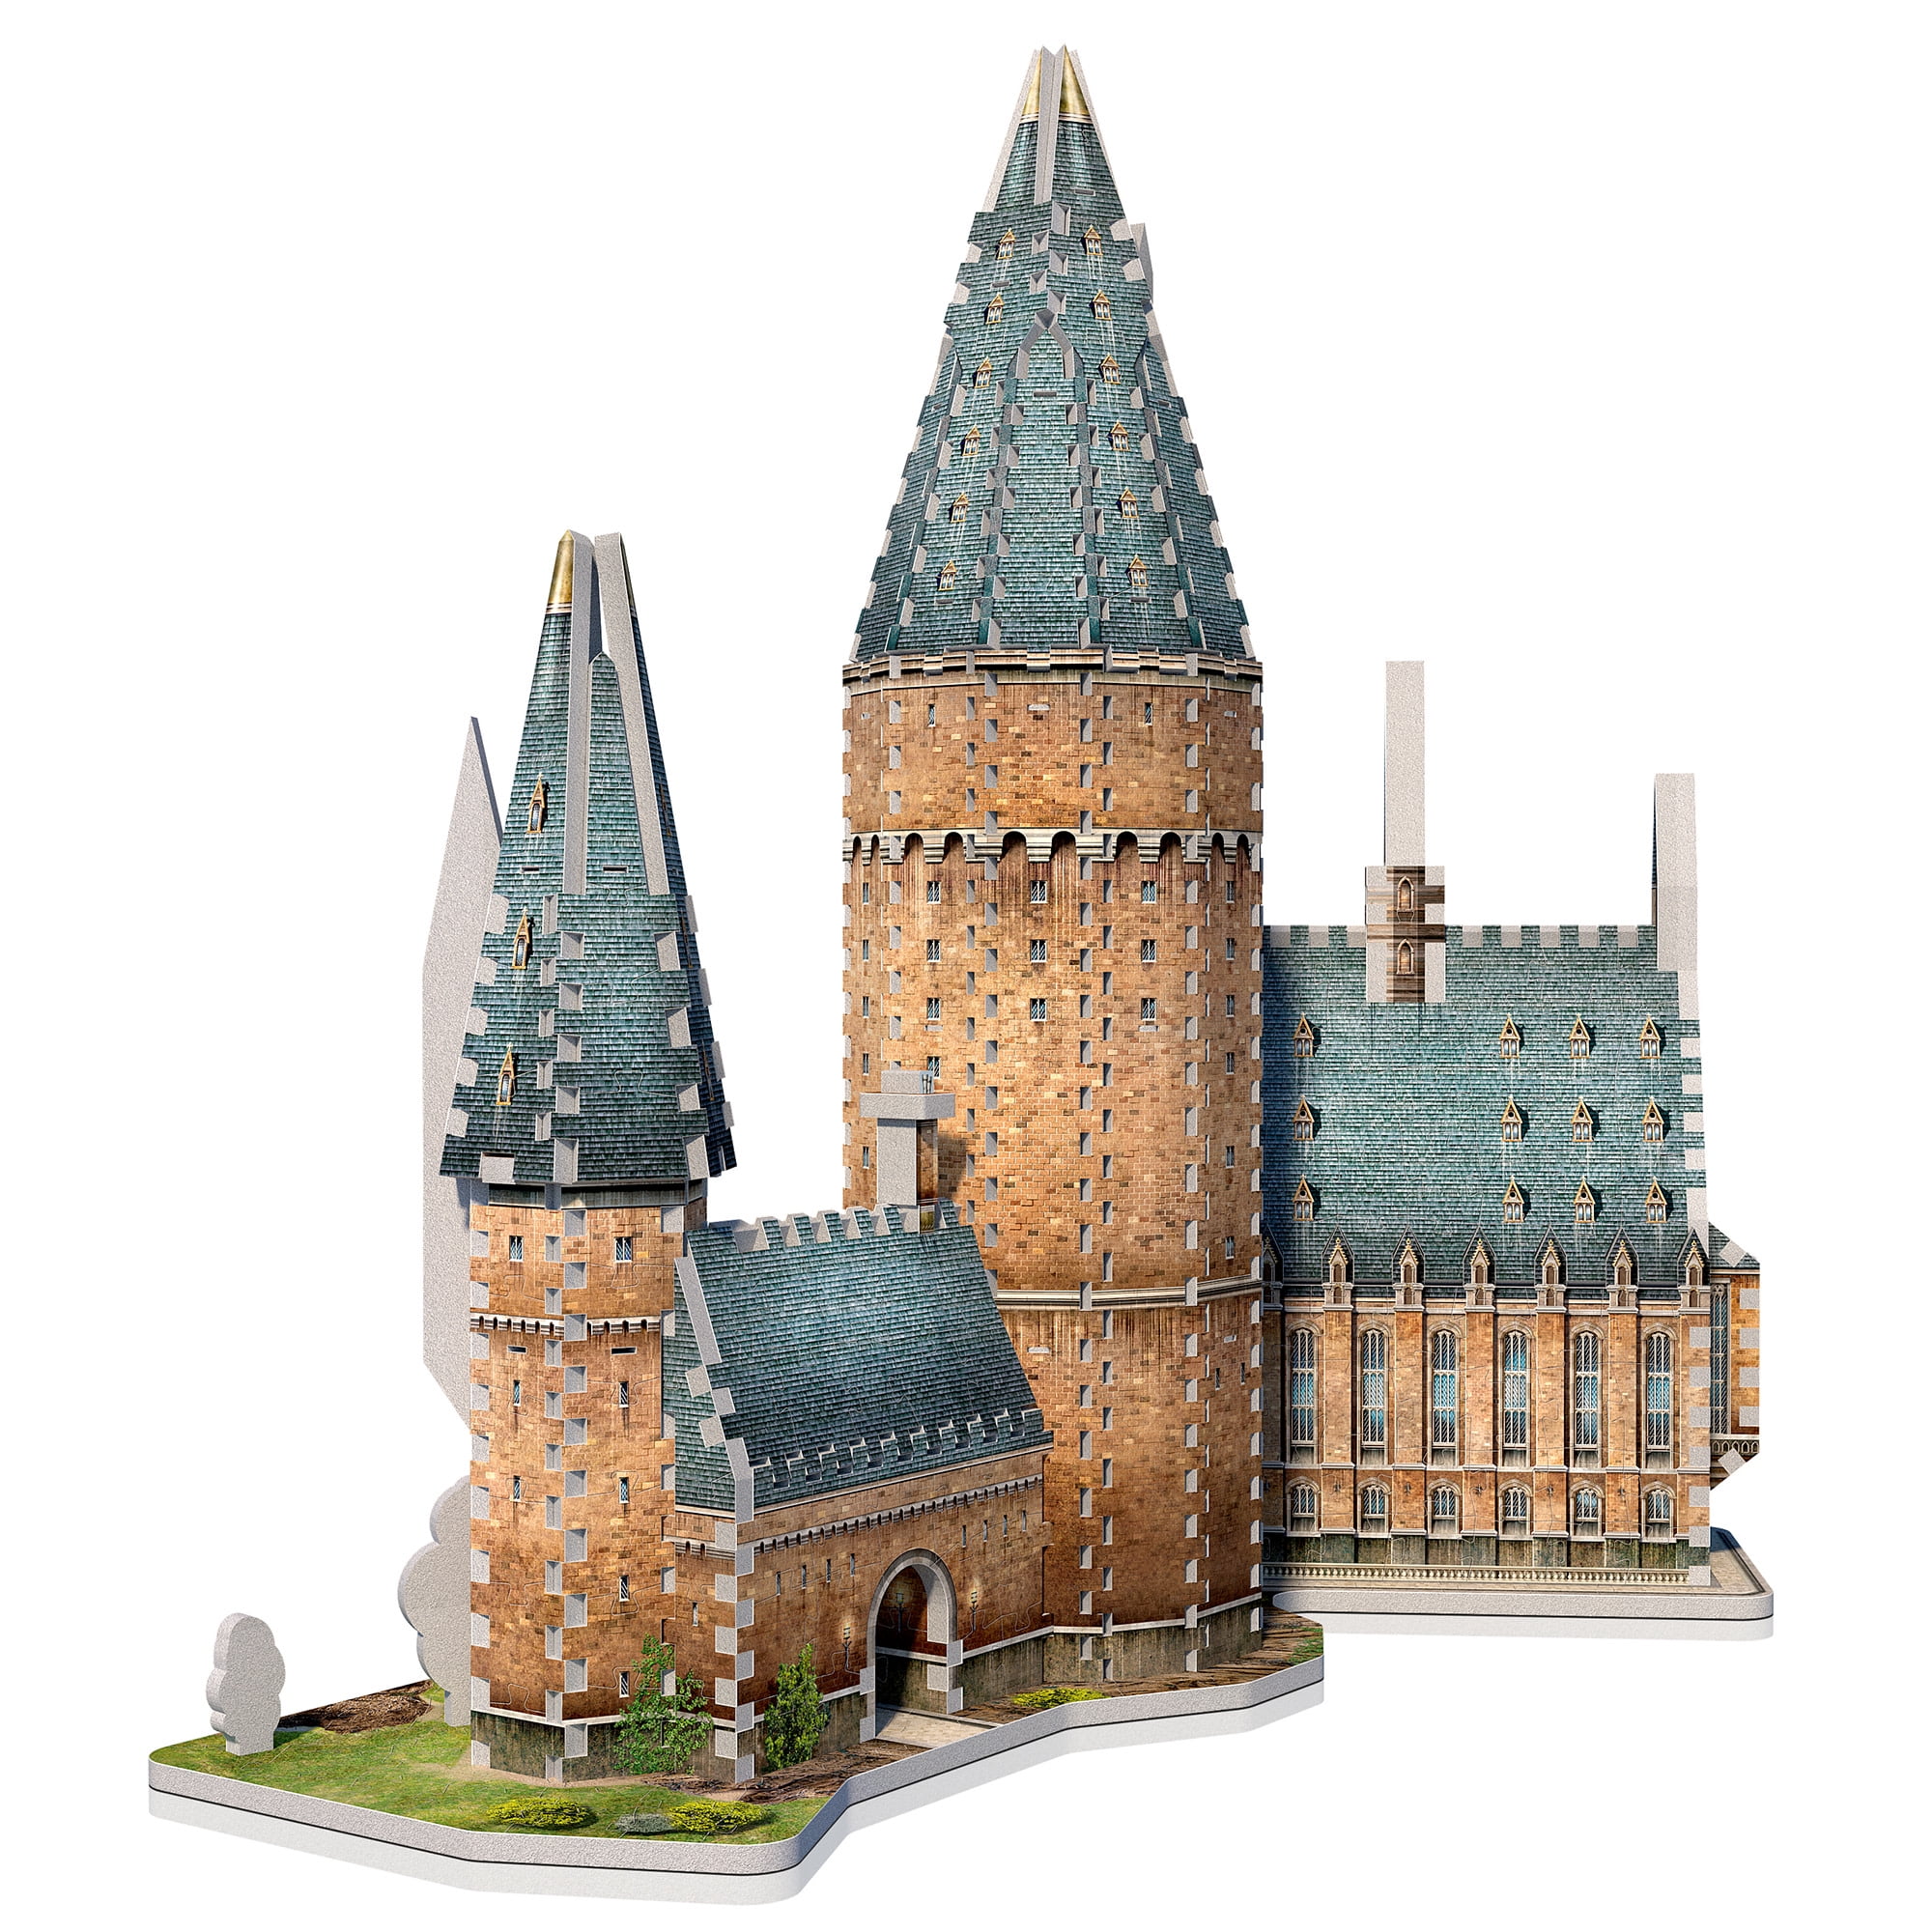 Puzzle 3D effect: Harry Potter: Hogwarts School of Witchcraft and